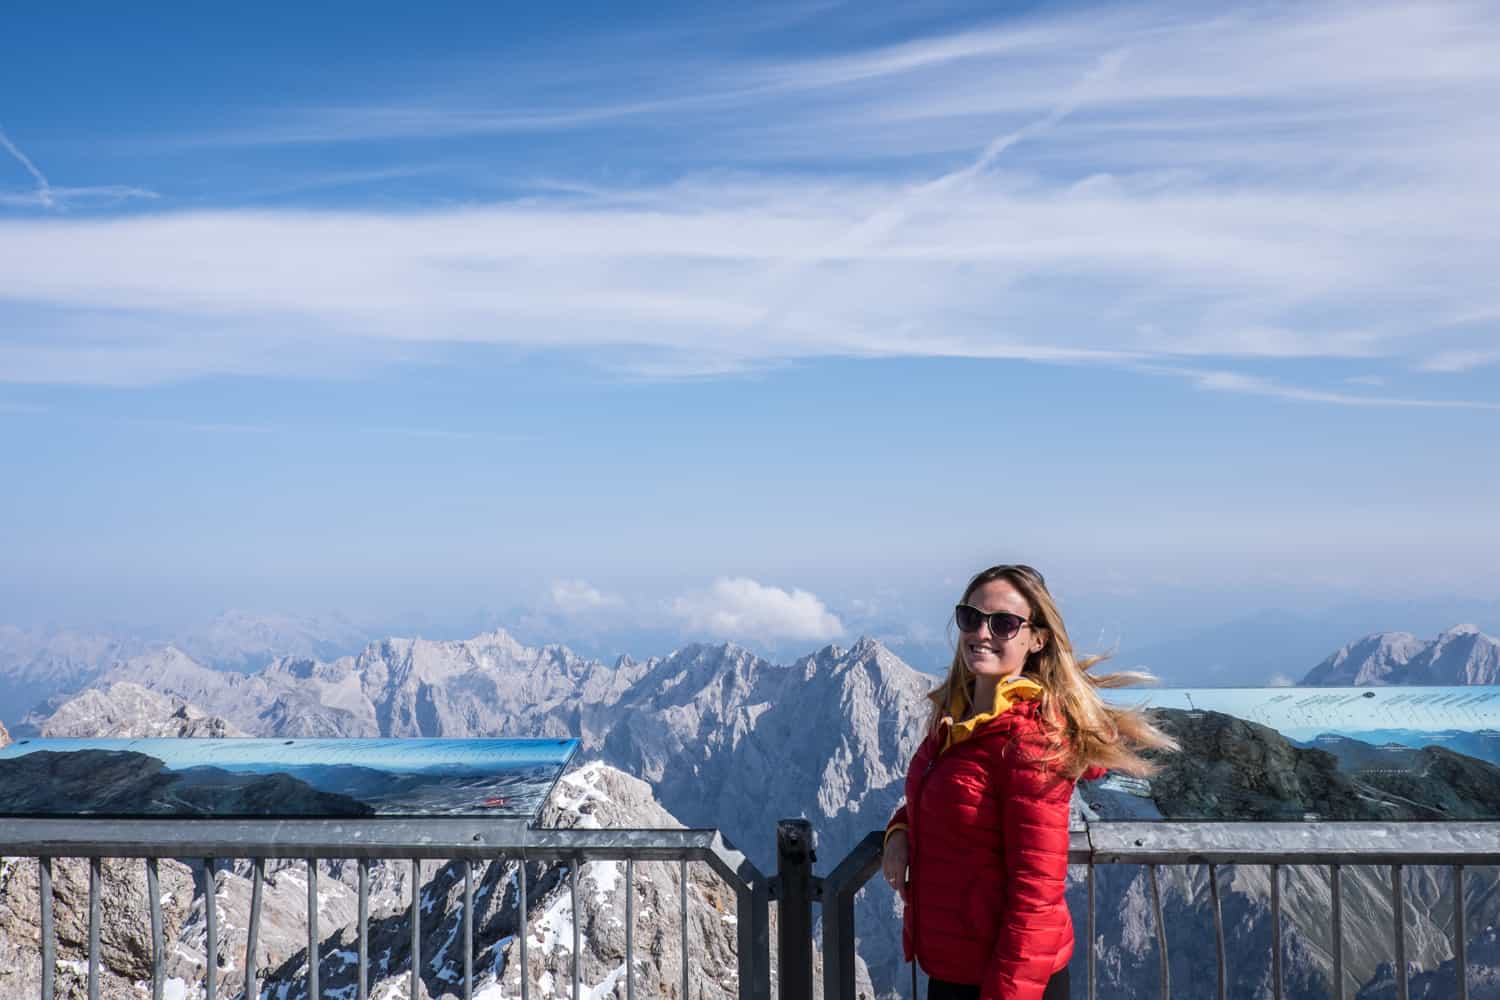 Views of Austria, Germany, Switzerland and Italy from the top of Zugspitze mountain